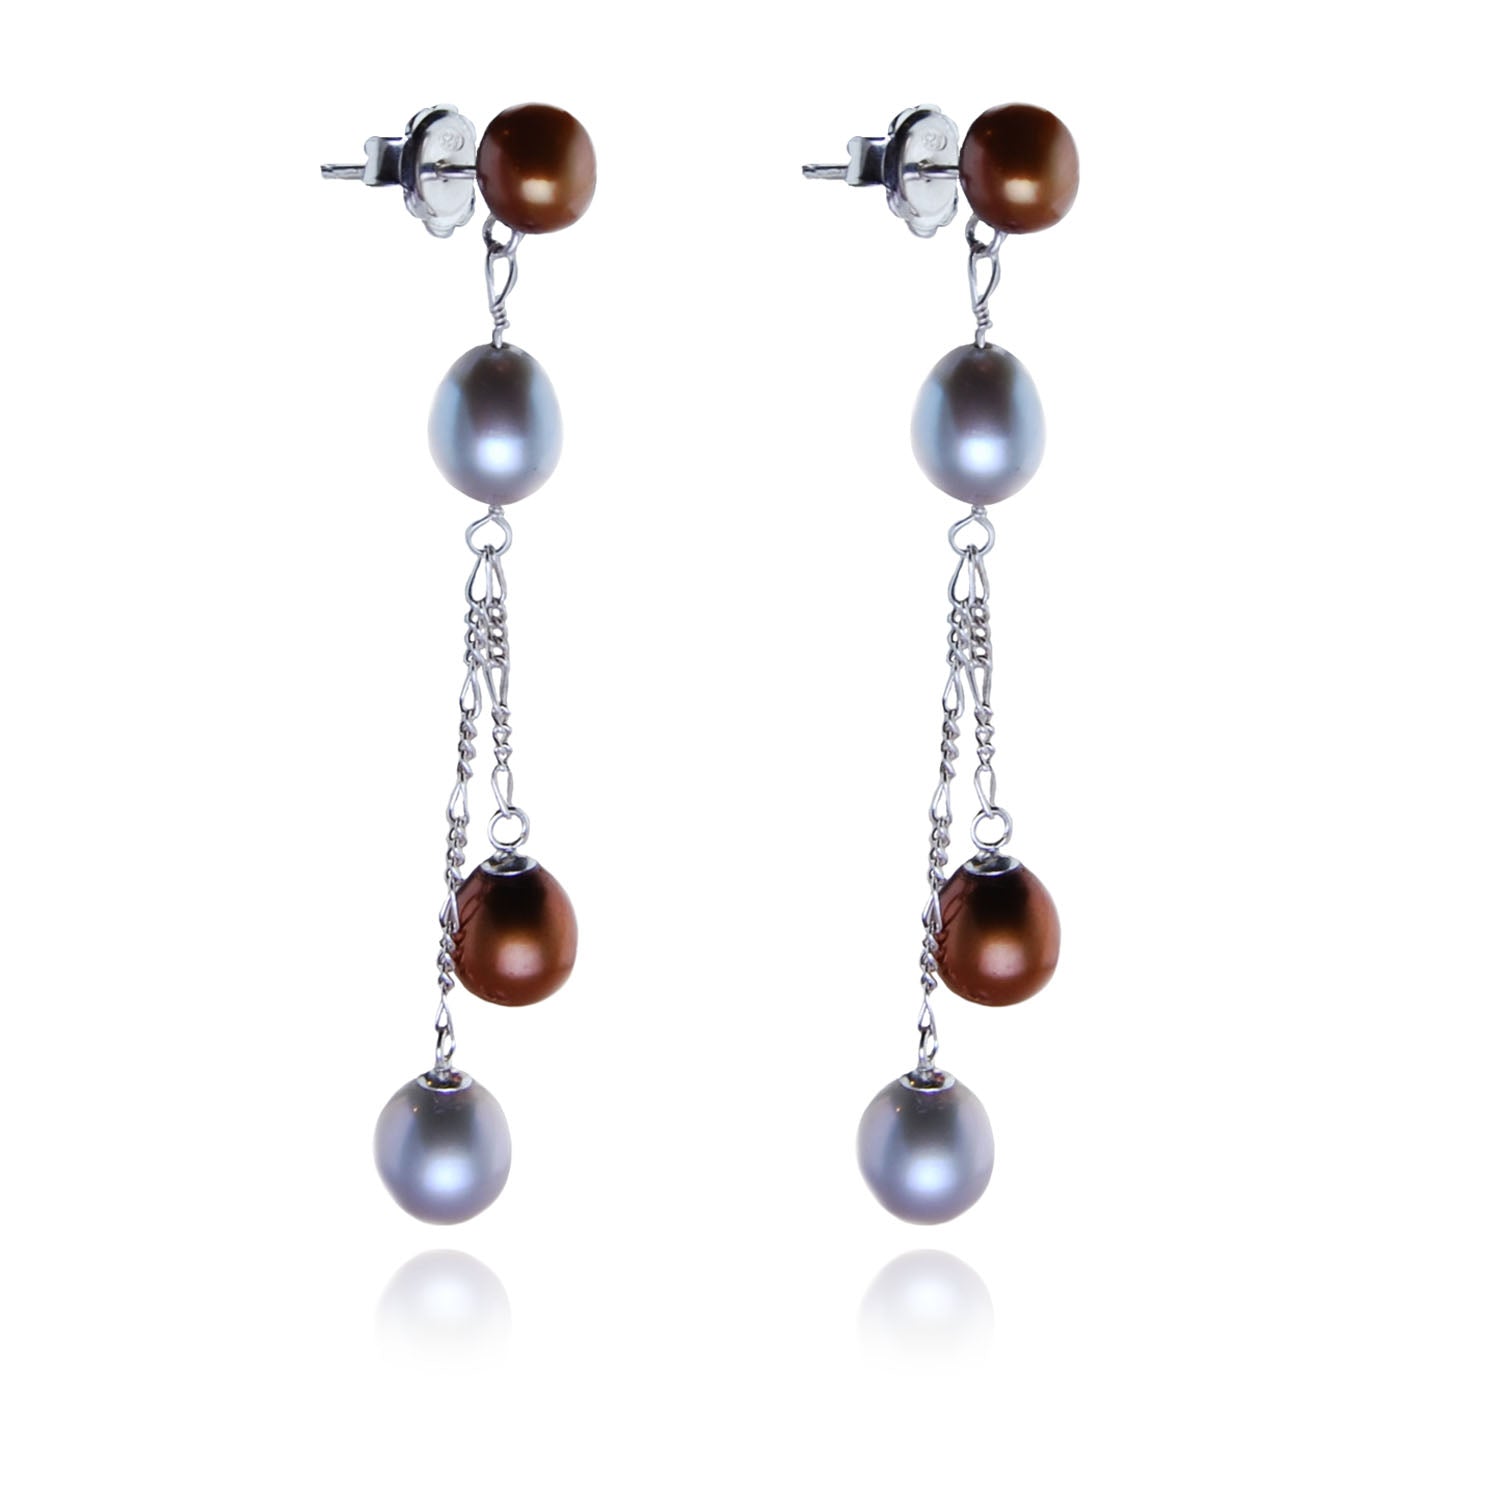 Freshwater Pearl Long Drop Earrings in Copper and Dove Grey